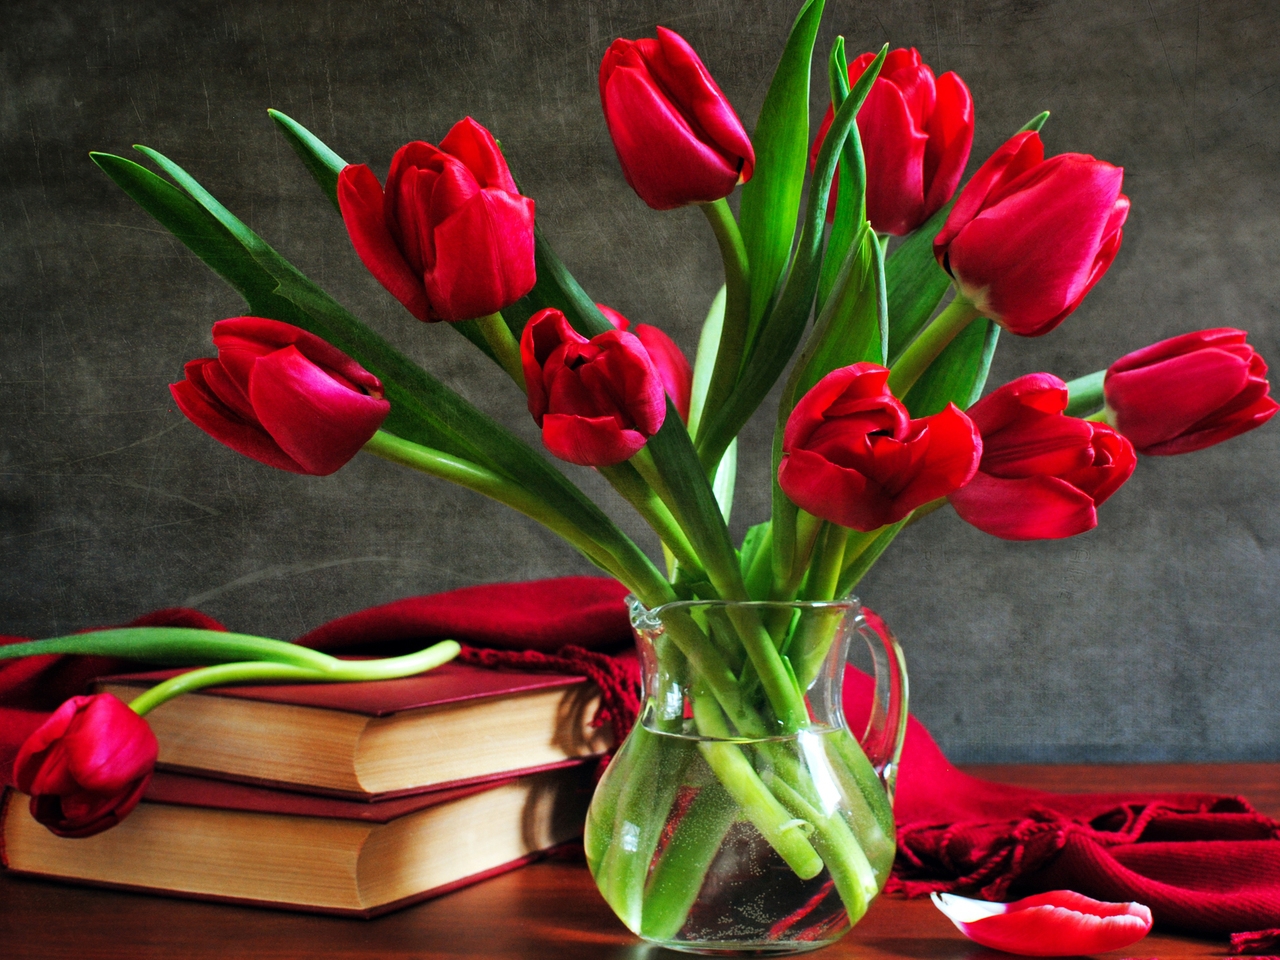 bouquets, flowers, plants, tulips cell phone wallpapers